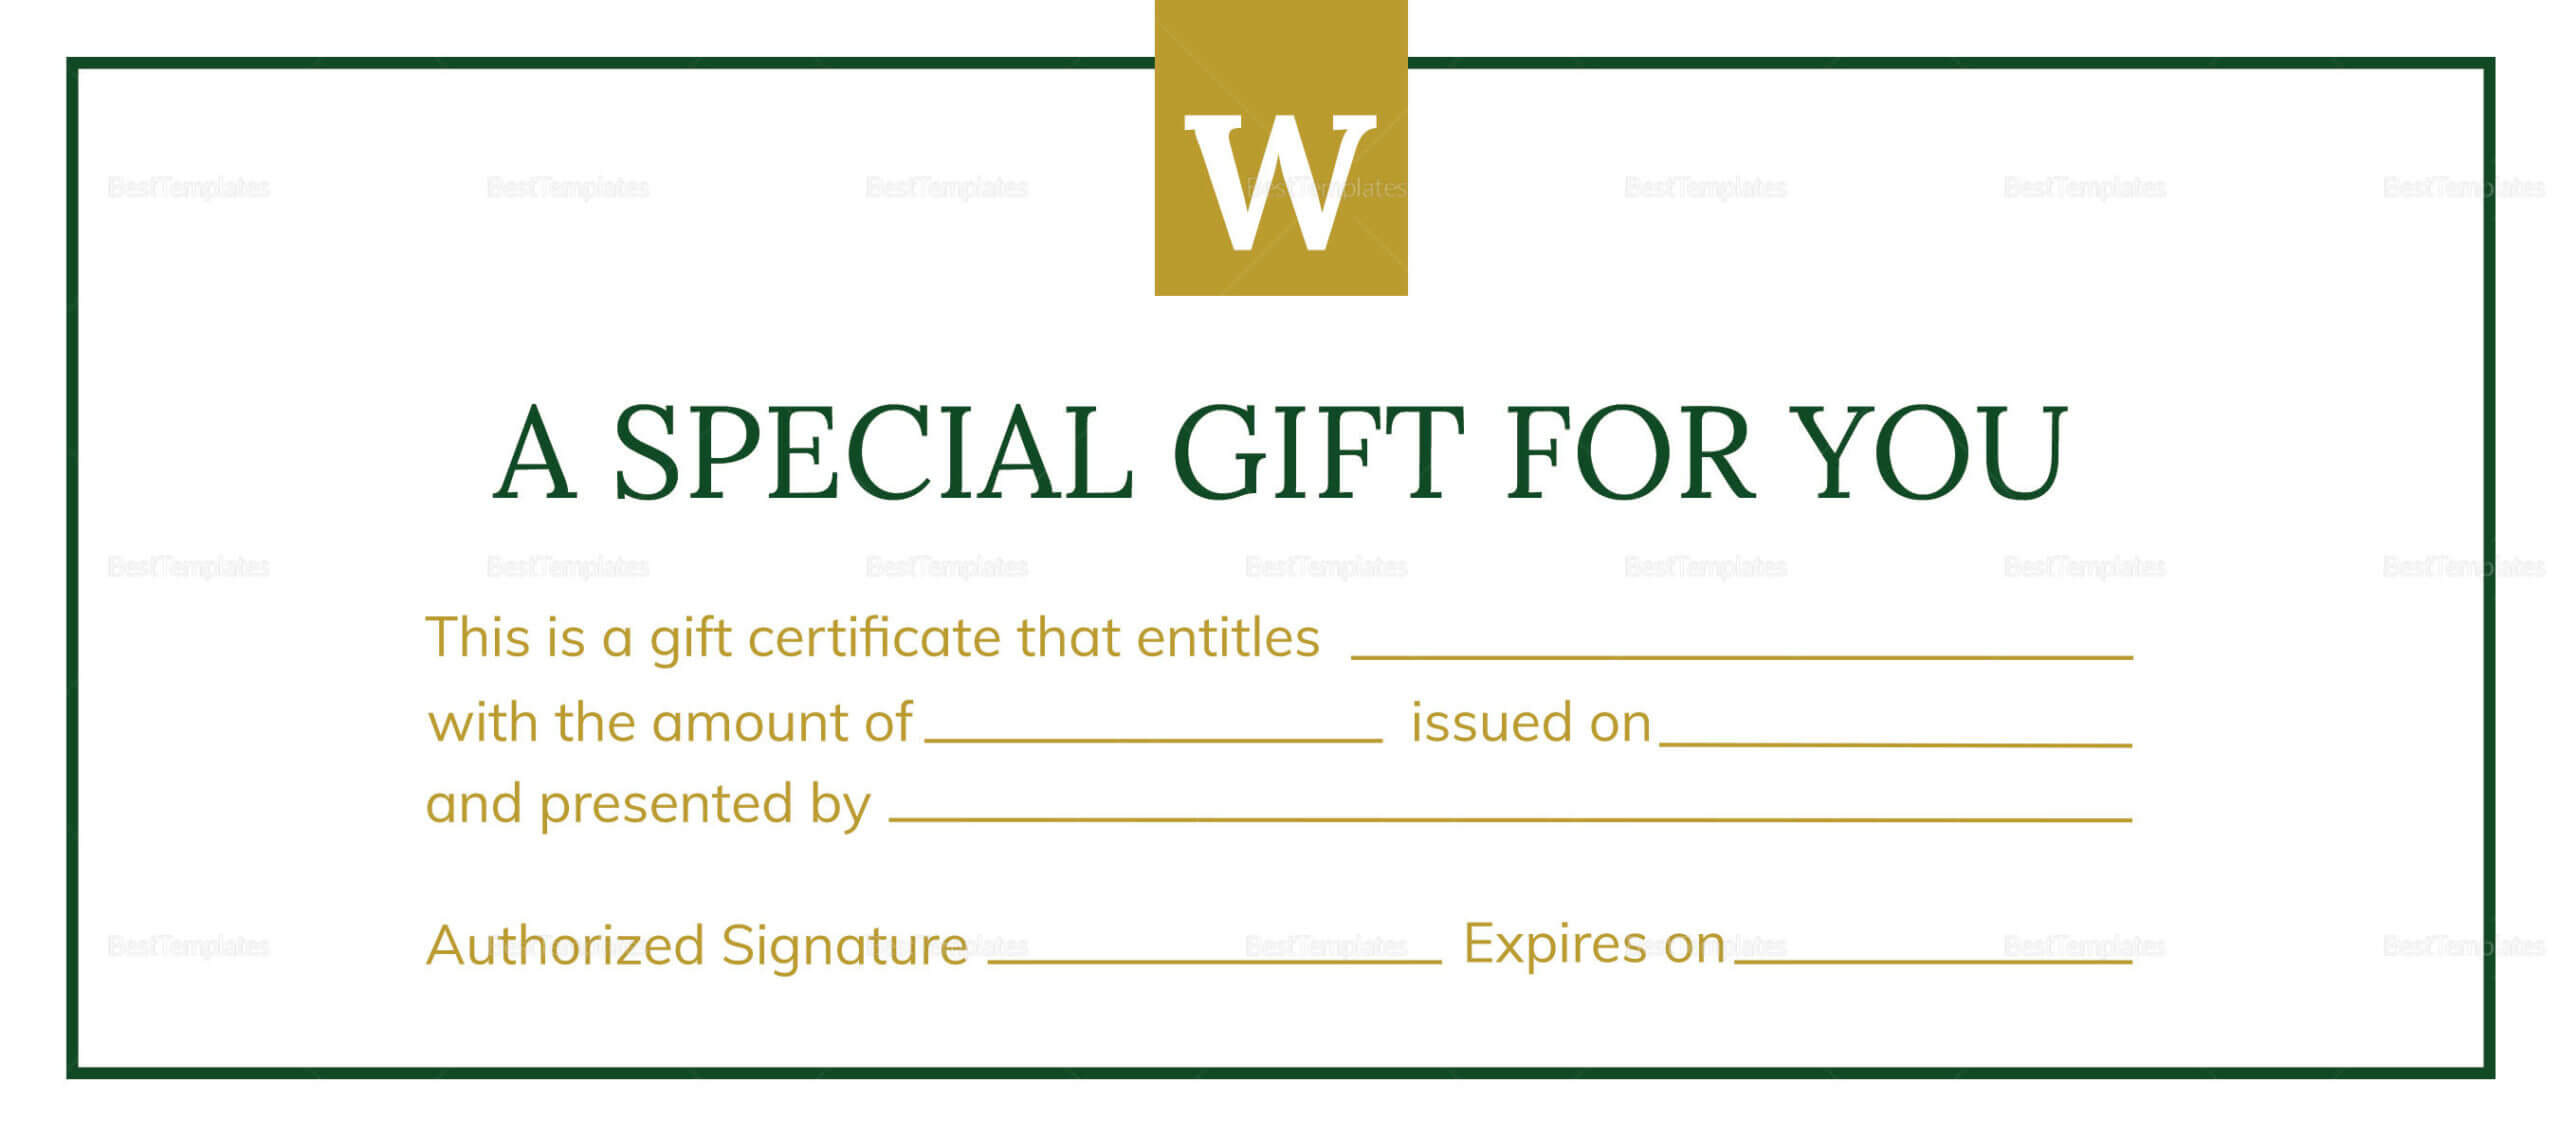 Gift Certificate Templates Indesign Illustrator Gift Coupon Pertaining To Gift Certificate Template Indesign